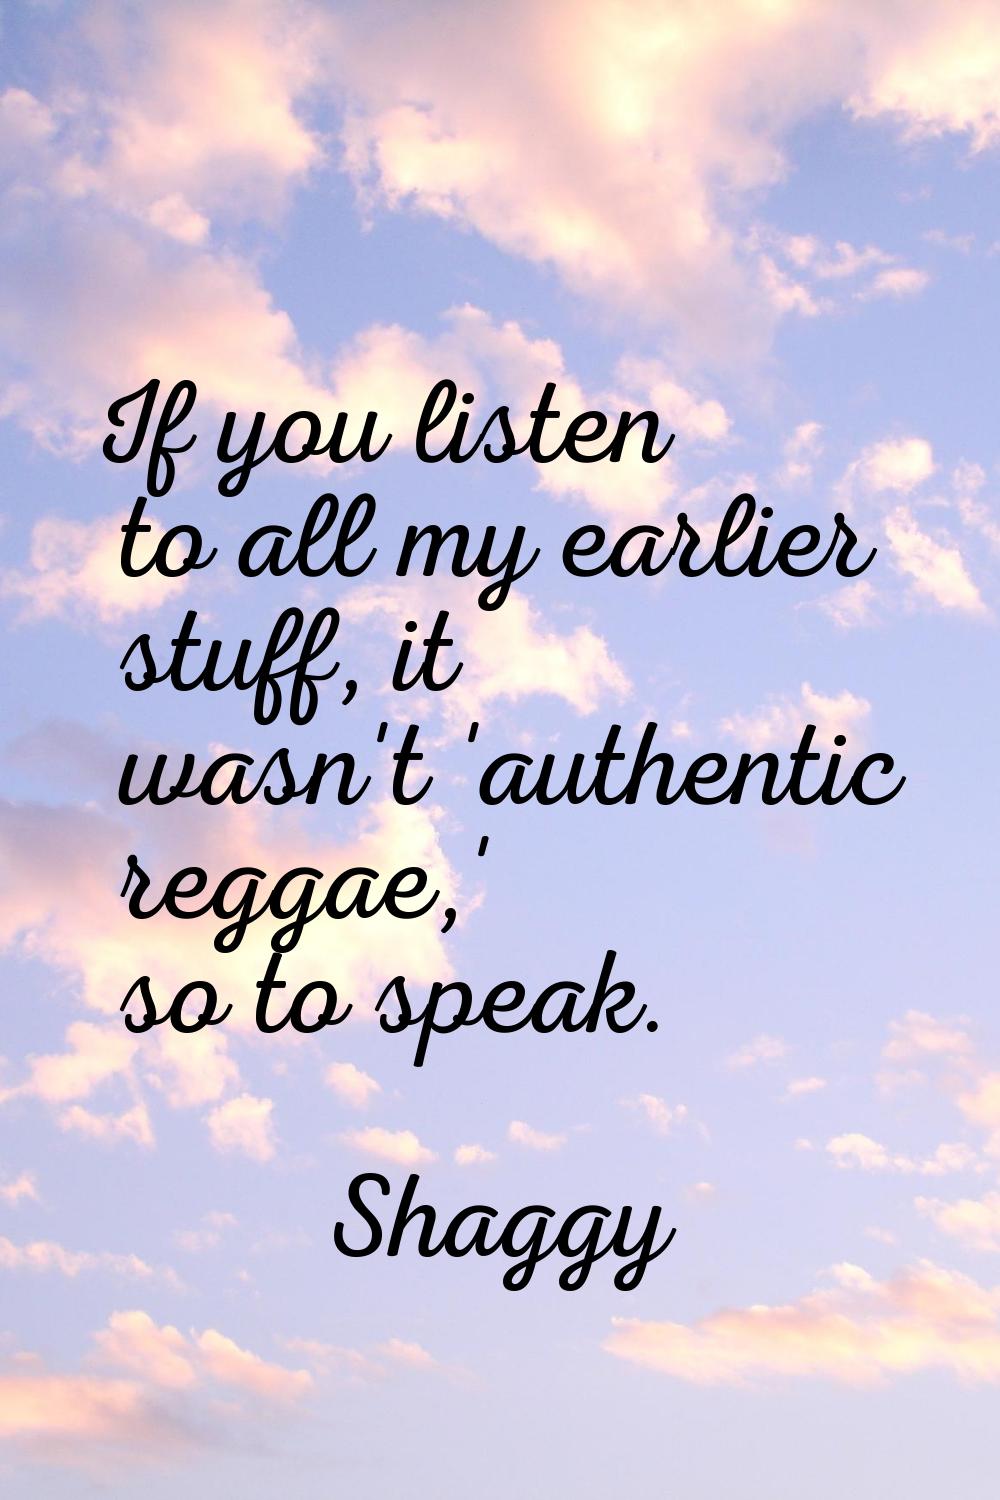 If you listen to all my earlier stuff, it wasn't 'authentic reggae,' so to speak.